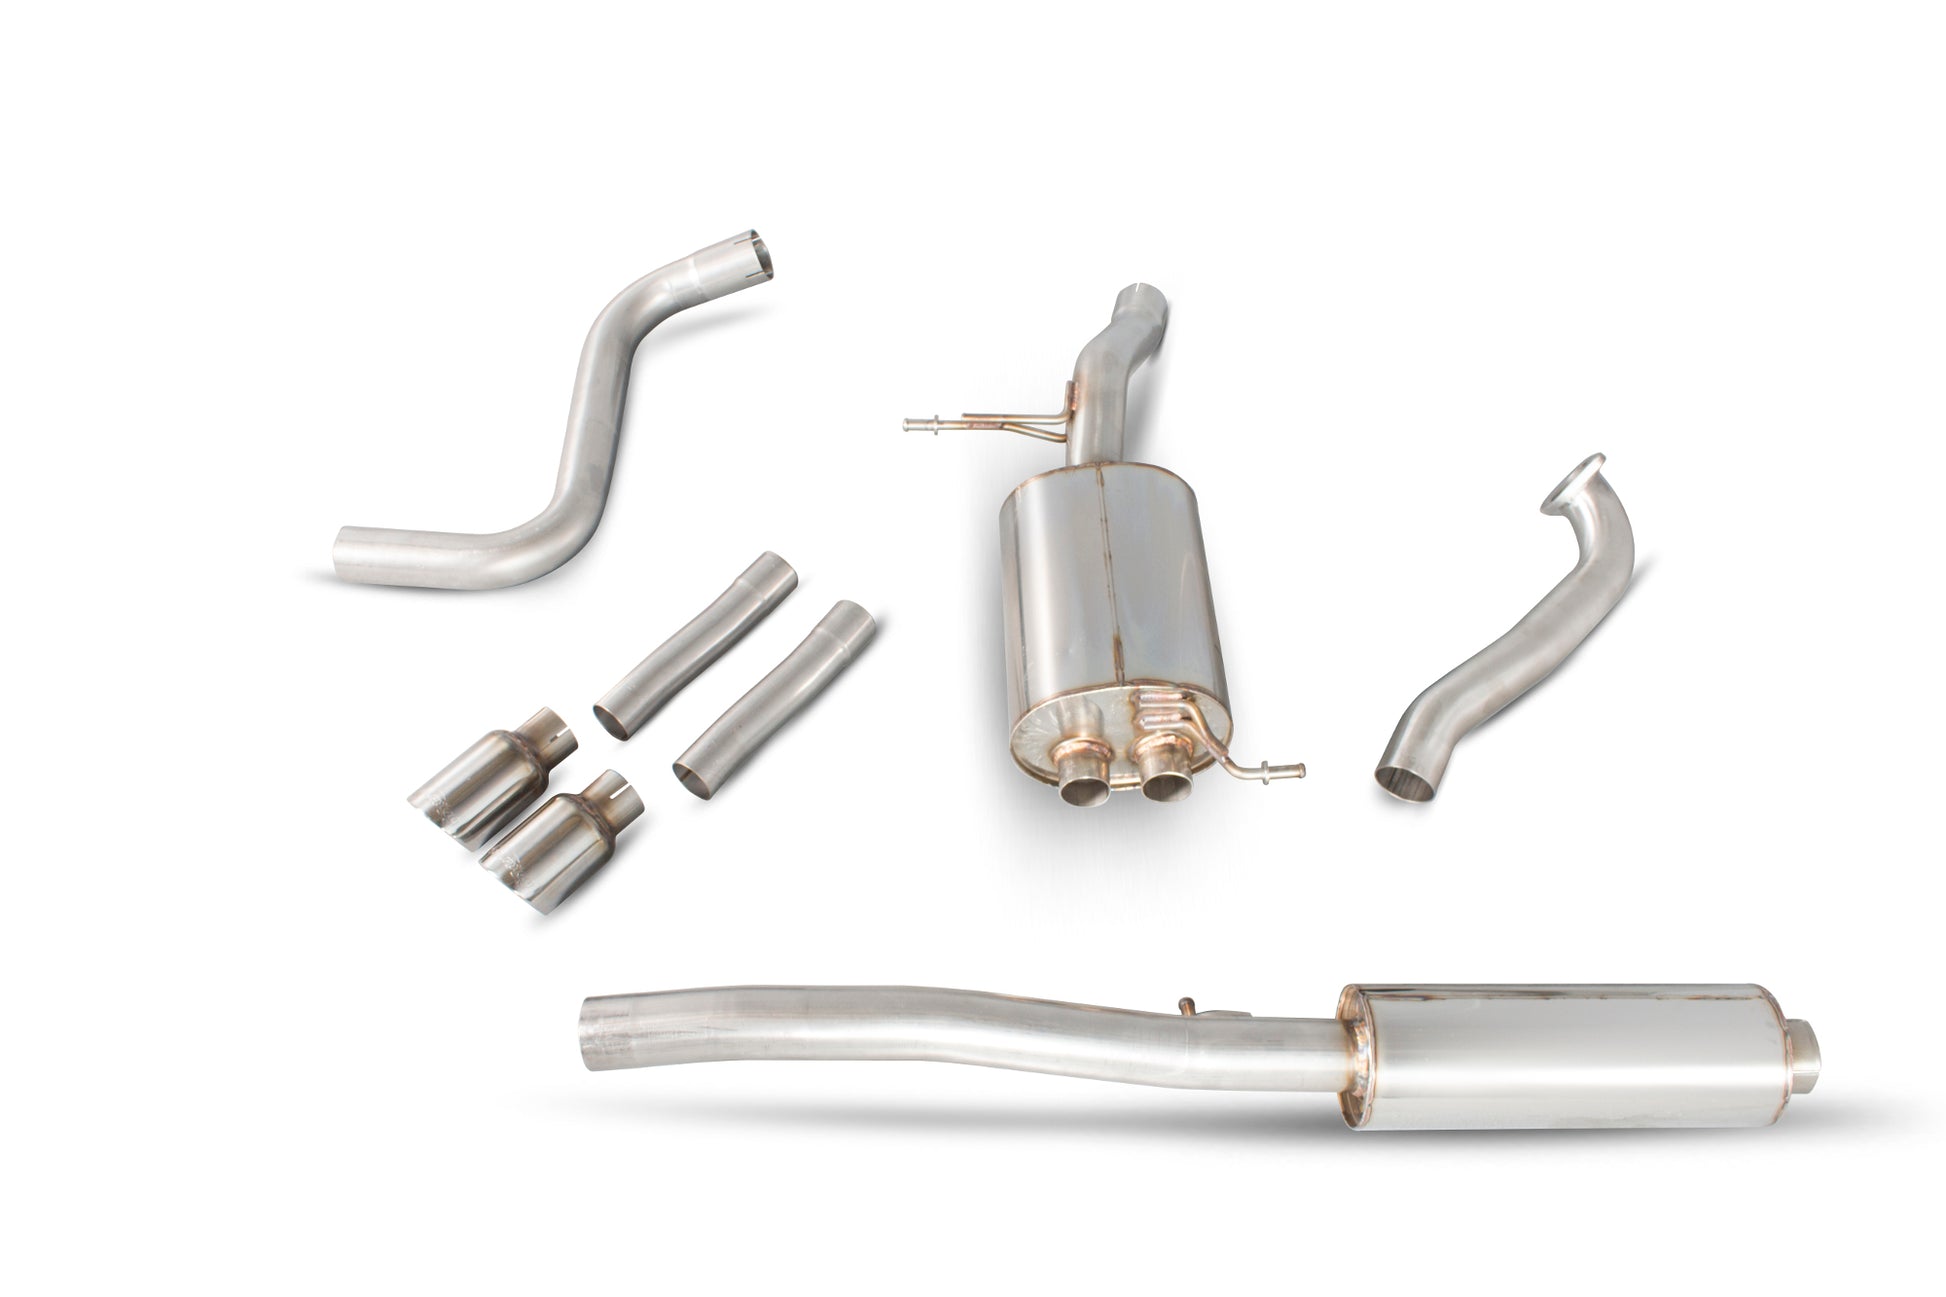 Scorpion Resonated Cat Back Exhaust System (Daytona Tip) - Ford Fiesta Ecoboost 1.0T 100,125 & 140 PS